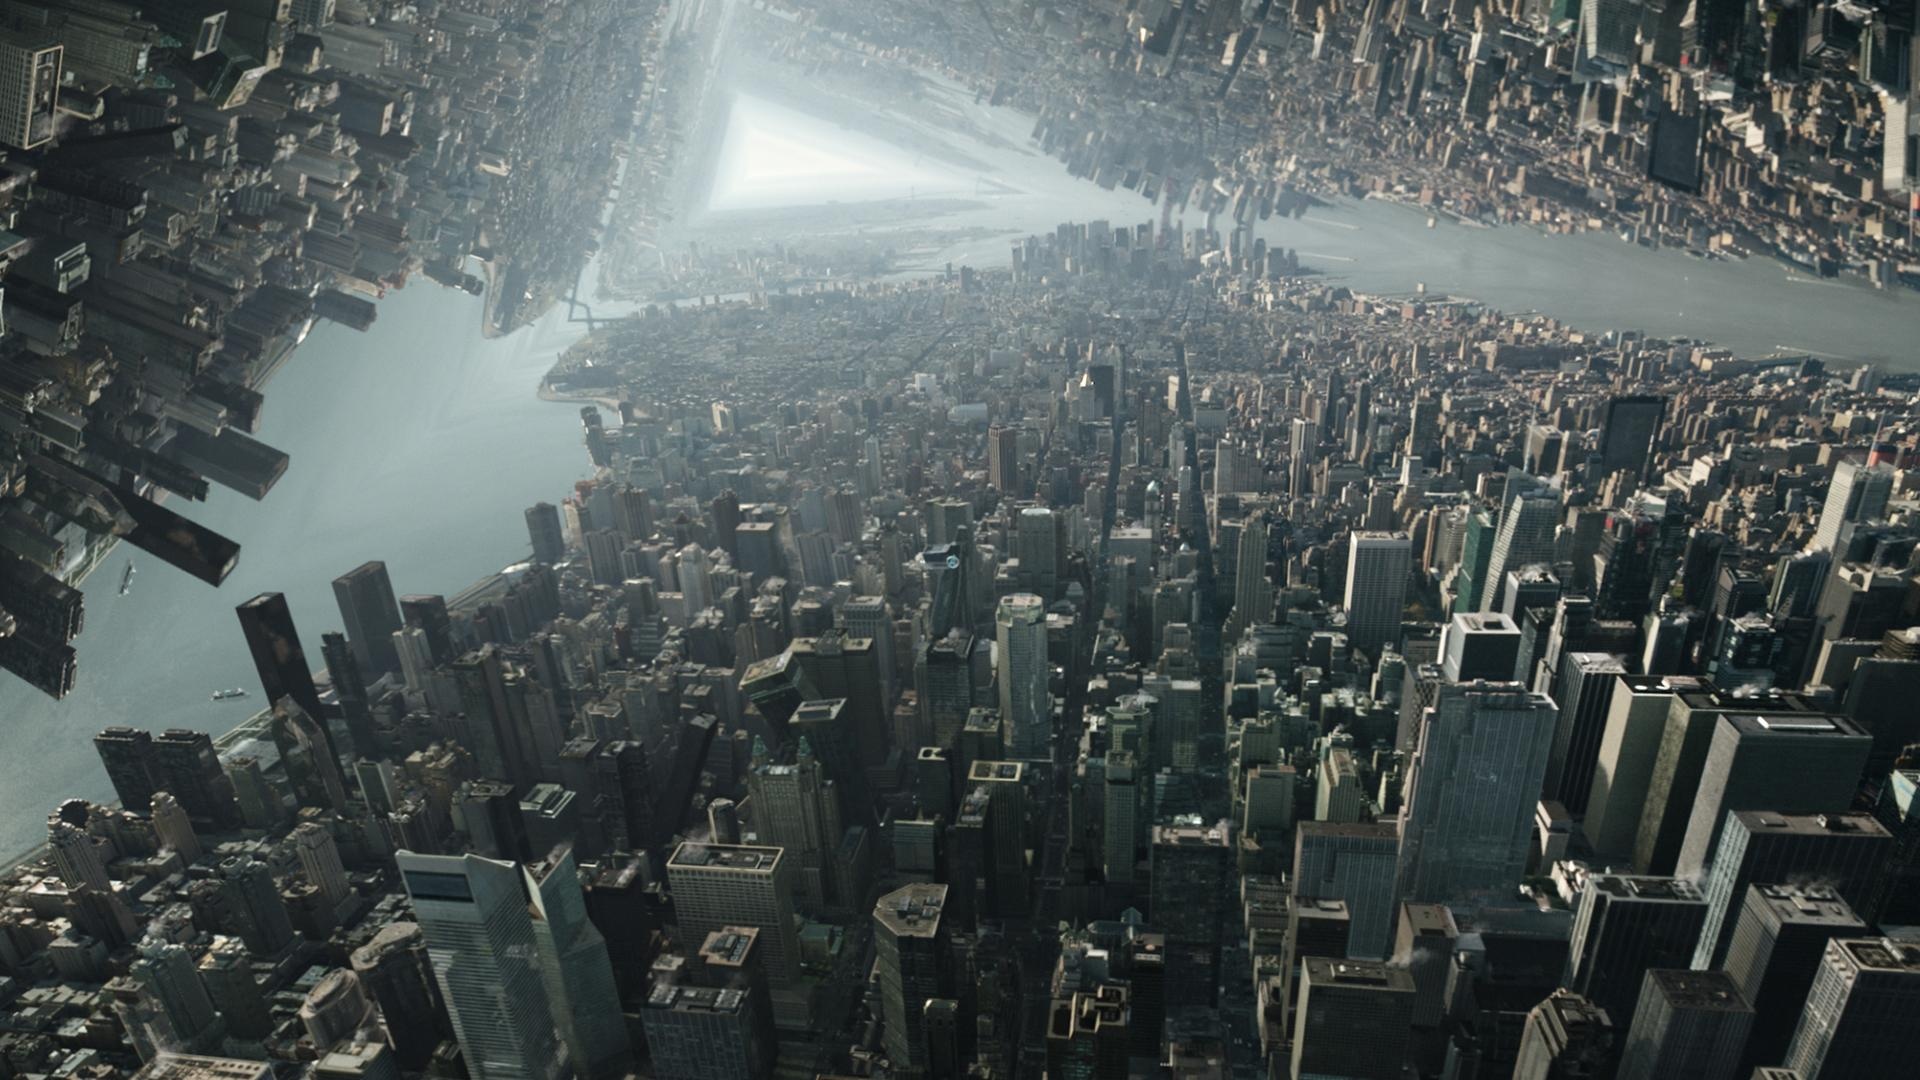 Inception: The score for the film was written by Hans Zimmer. 1920x1080 Full HD Wallpaper.